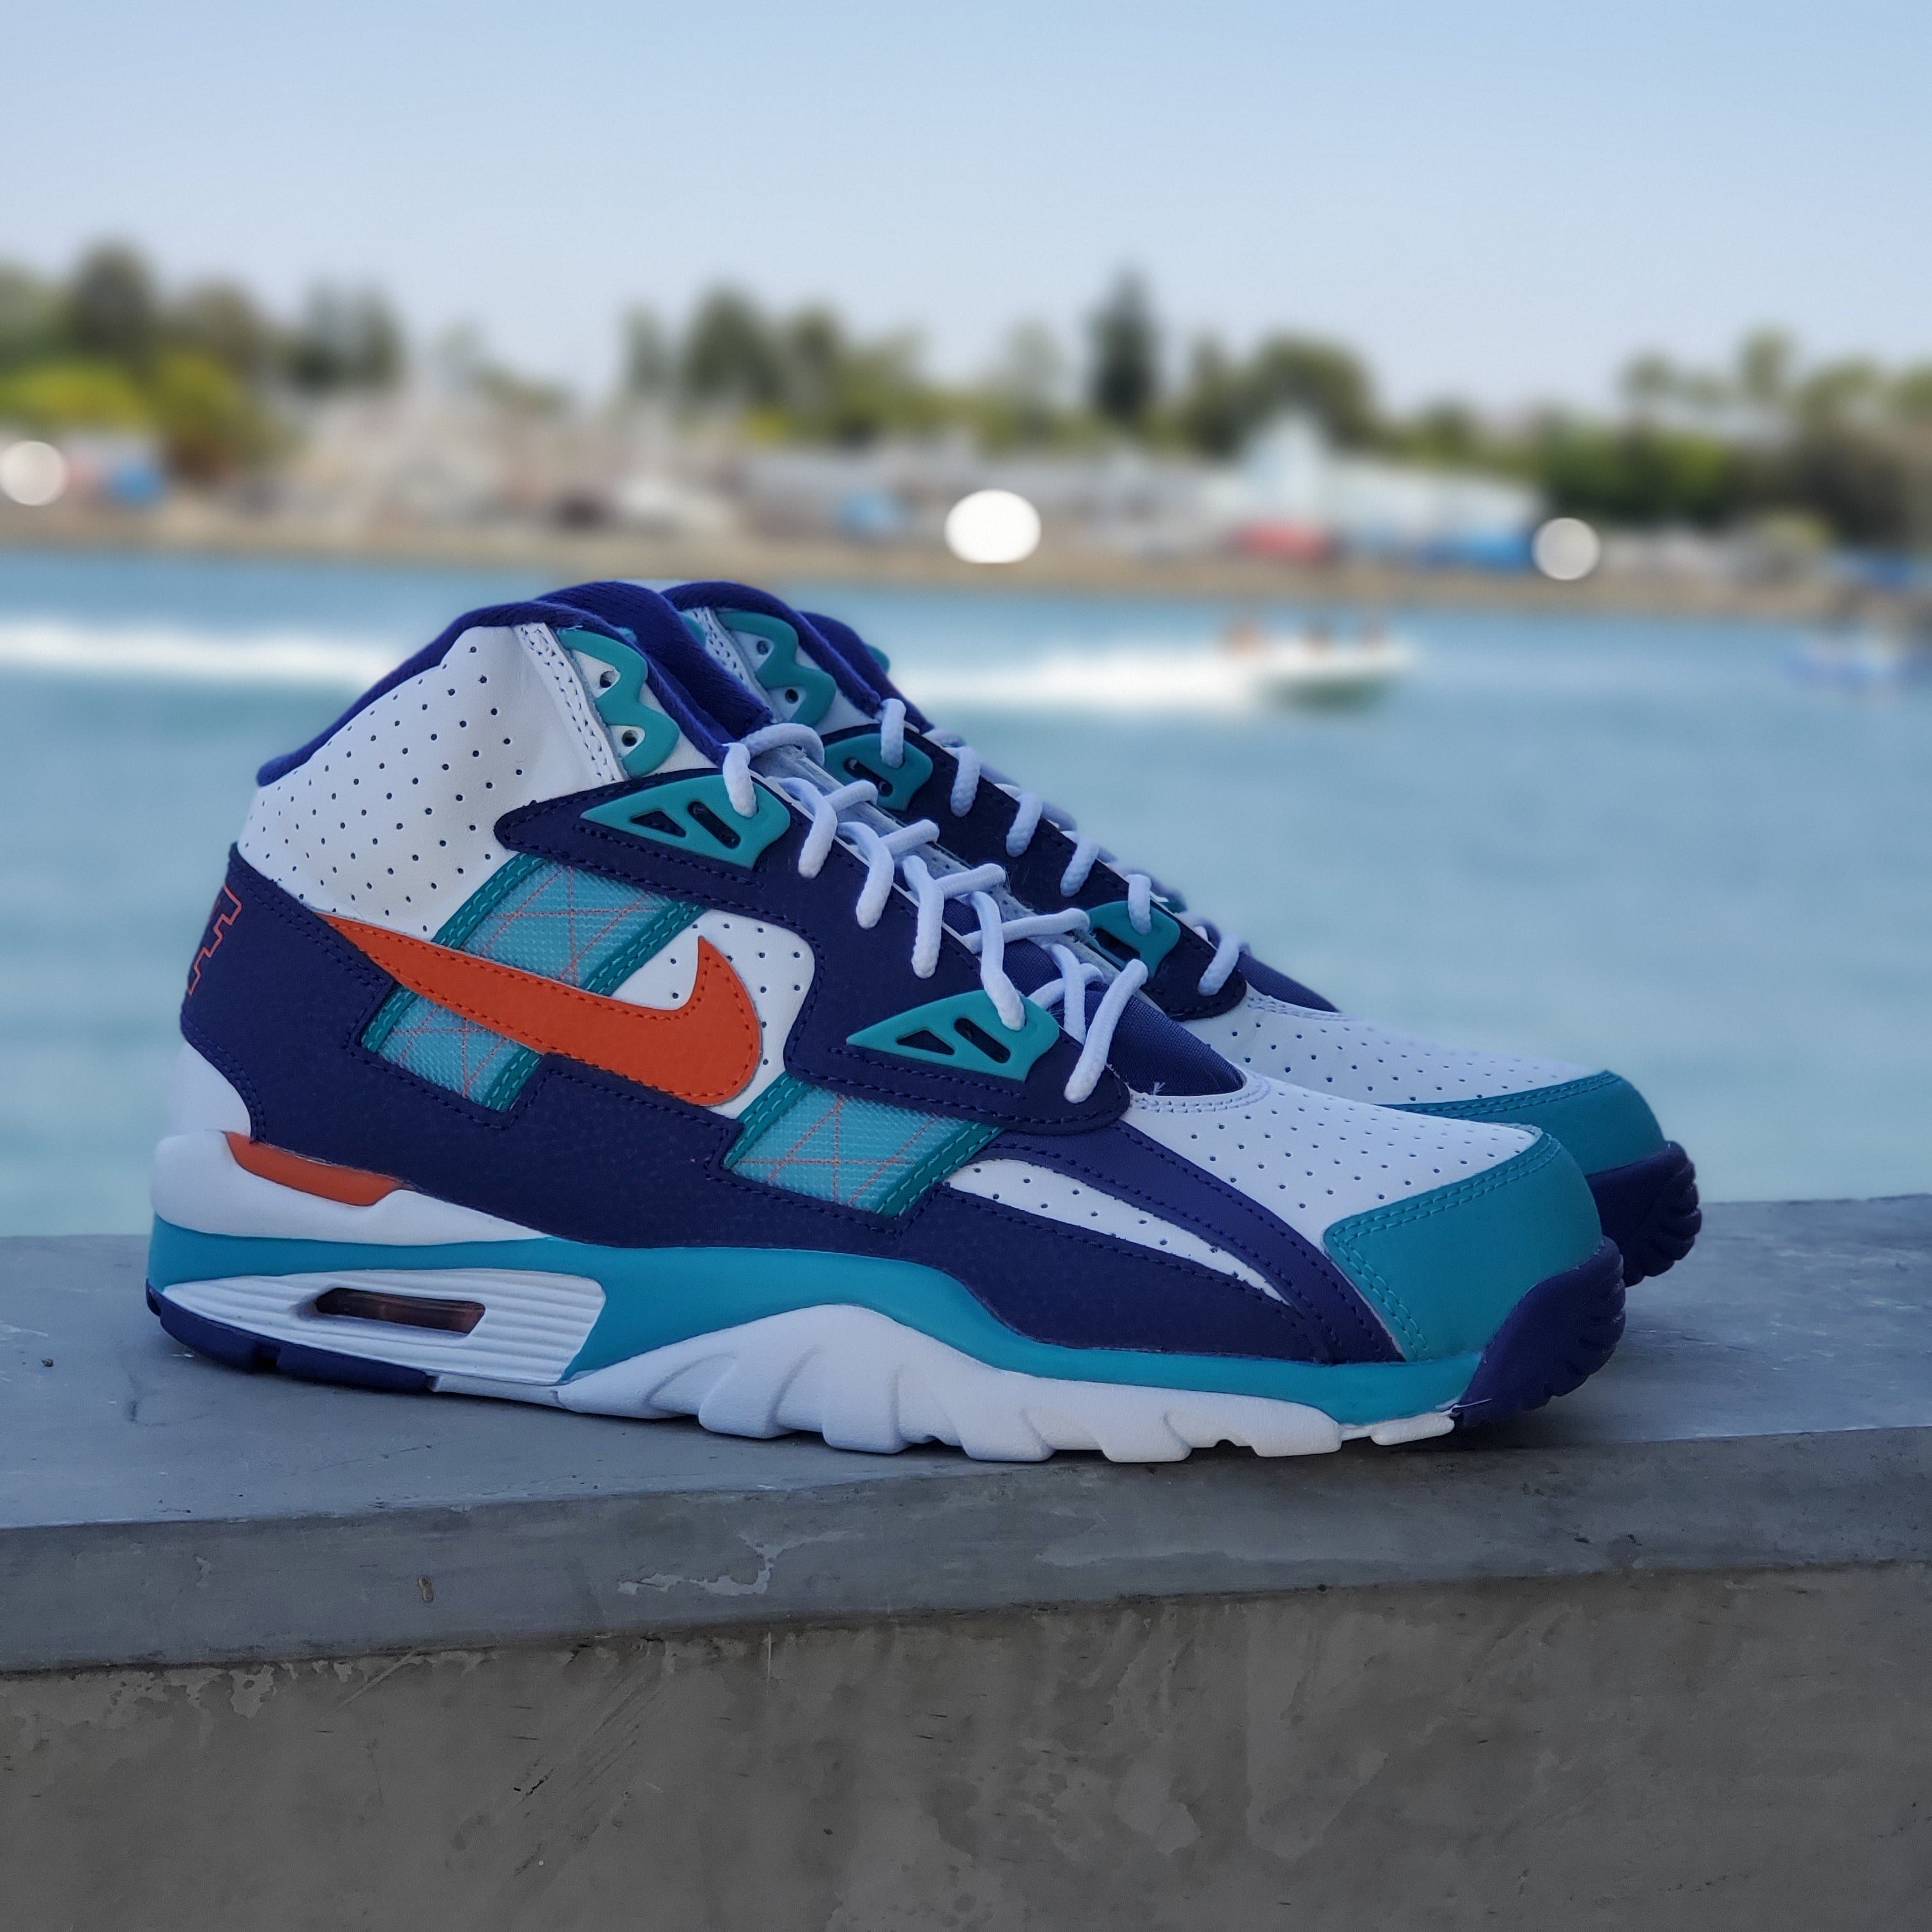 dolphins nike shoes